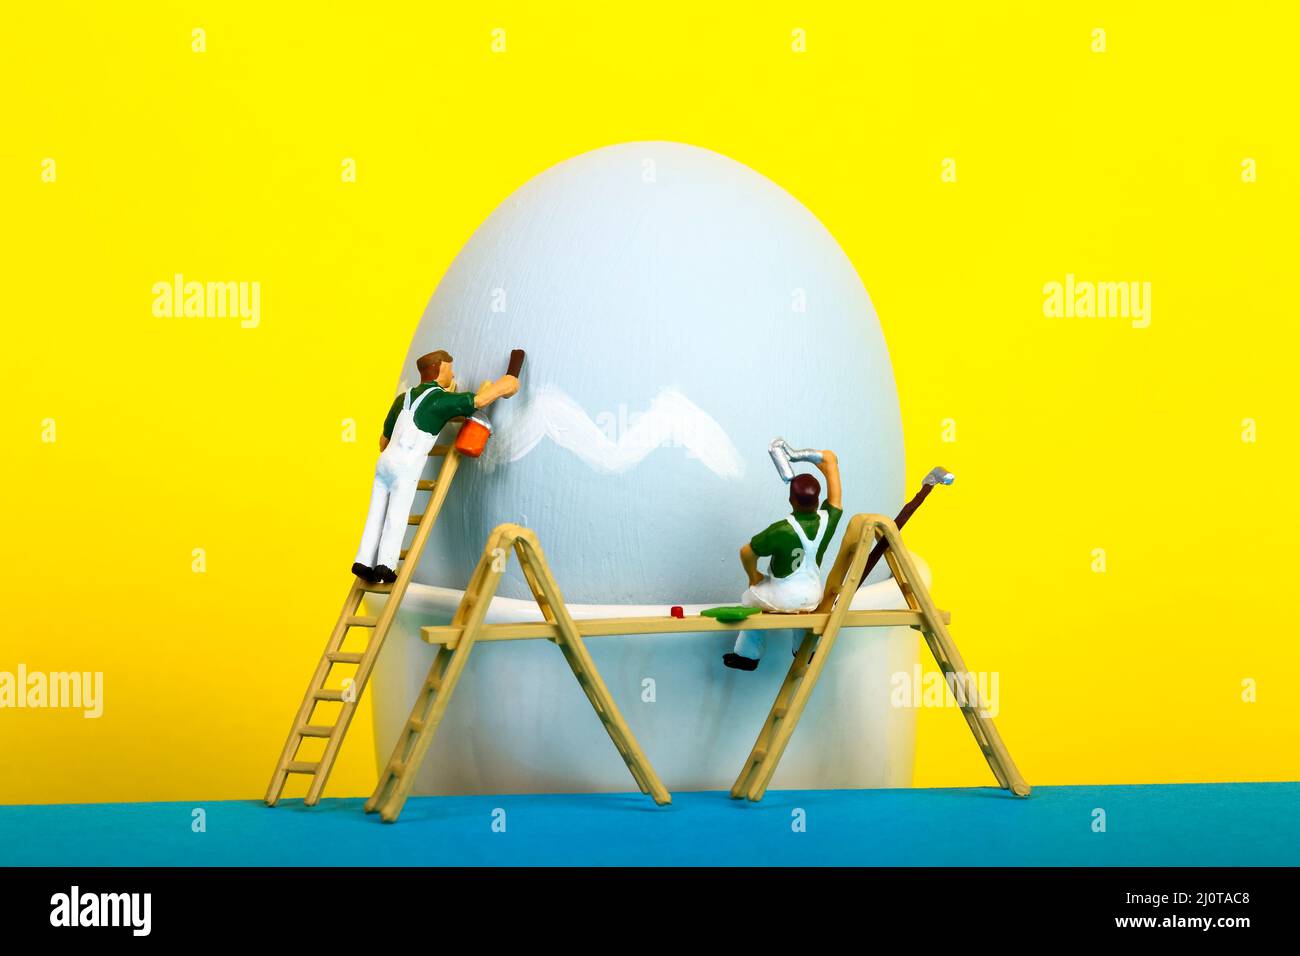 Conceptual image of miniature figure people painting a hens egg for Easter Stock Photo